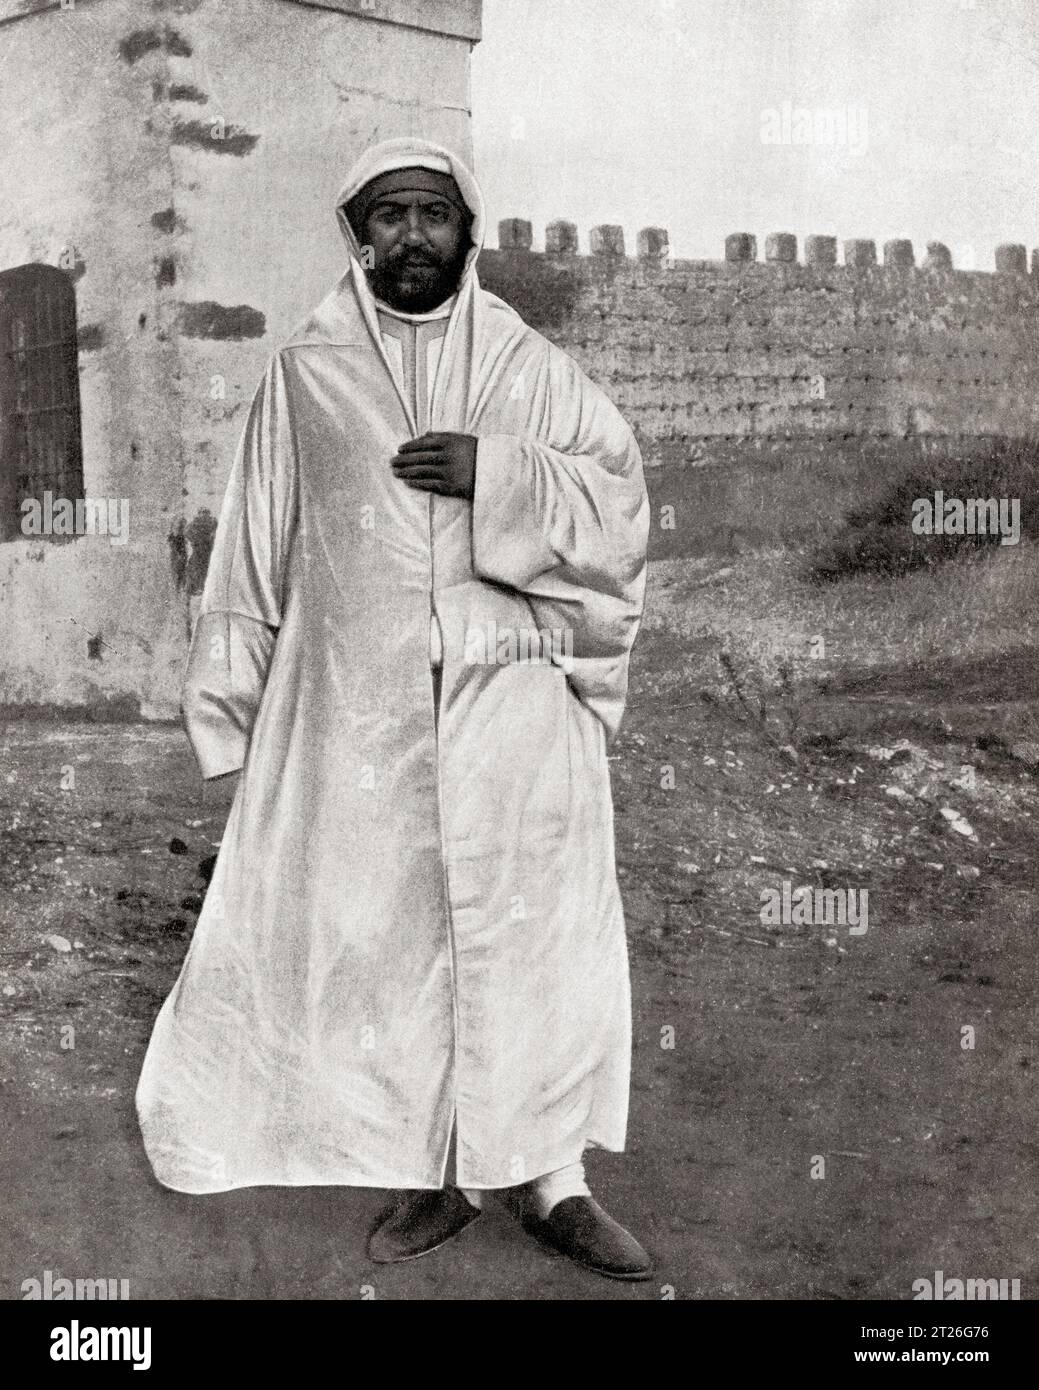 Moulay Yusef ben Hassan, 1882 - 1927.  'Alawi sultan of Morocco from 1912 to 1927.  From Mundo Grafico, published 1912. Stock Photo